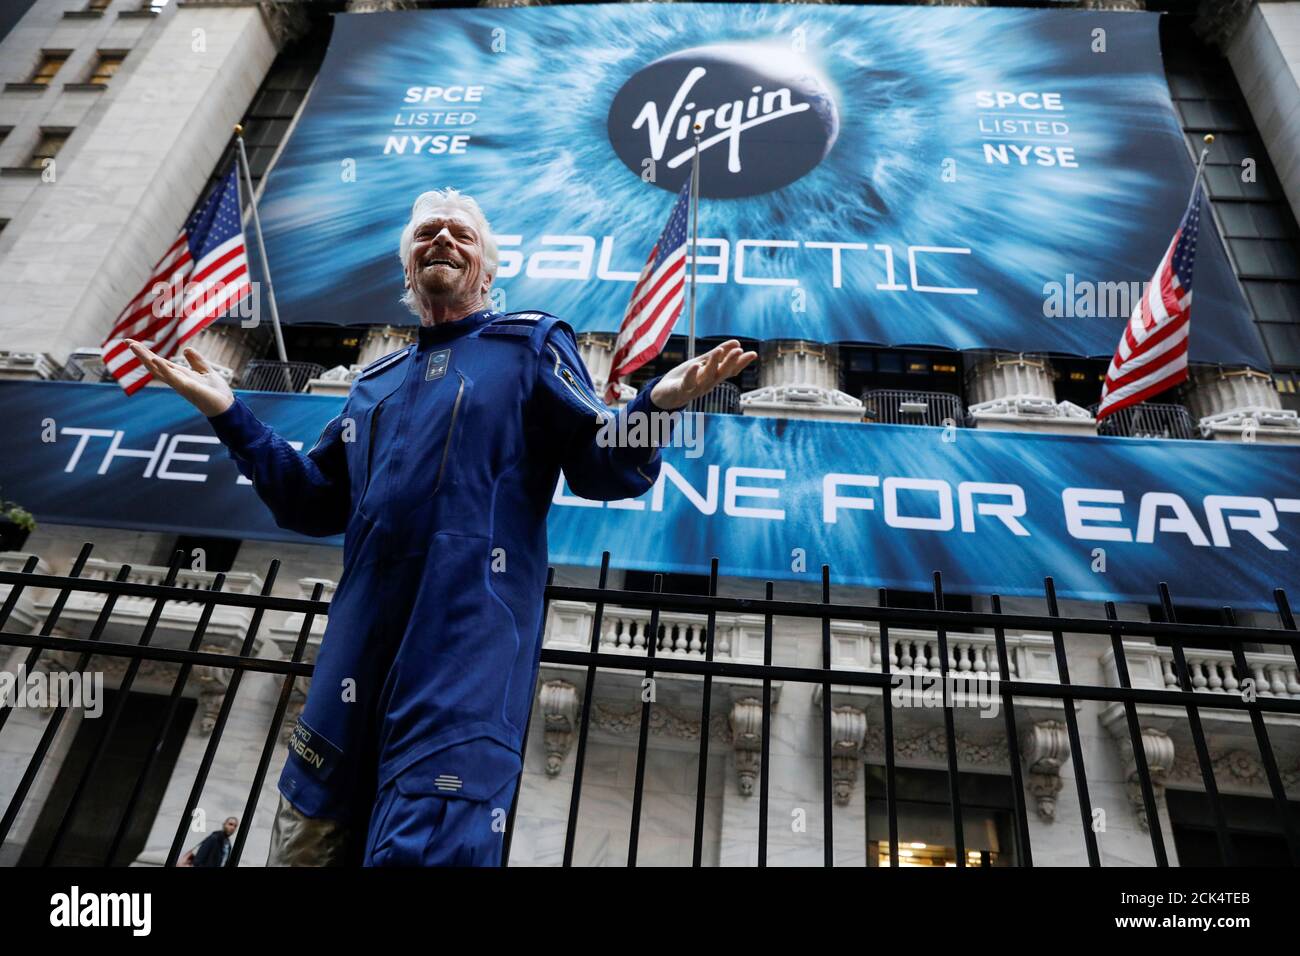 Sir Richard Branson stands outside the New York Stock Exchange (NYSE) ahead of the Virgin Galactic (SPCE) IPO in New York, U.S., October 28, 2019. REUTERS/Brendan McDermid Stock Photo